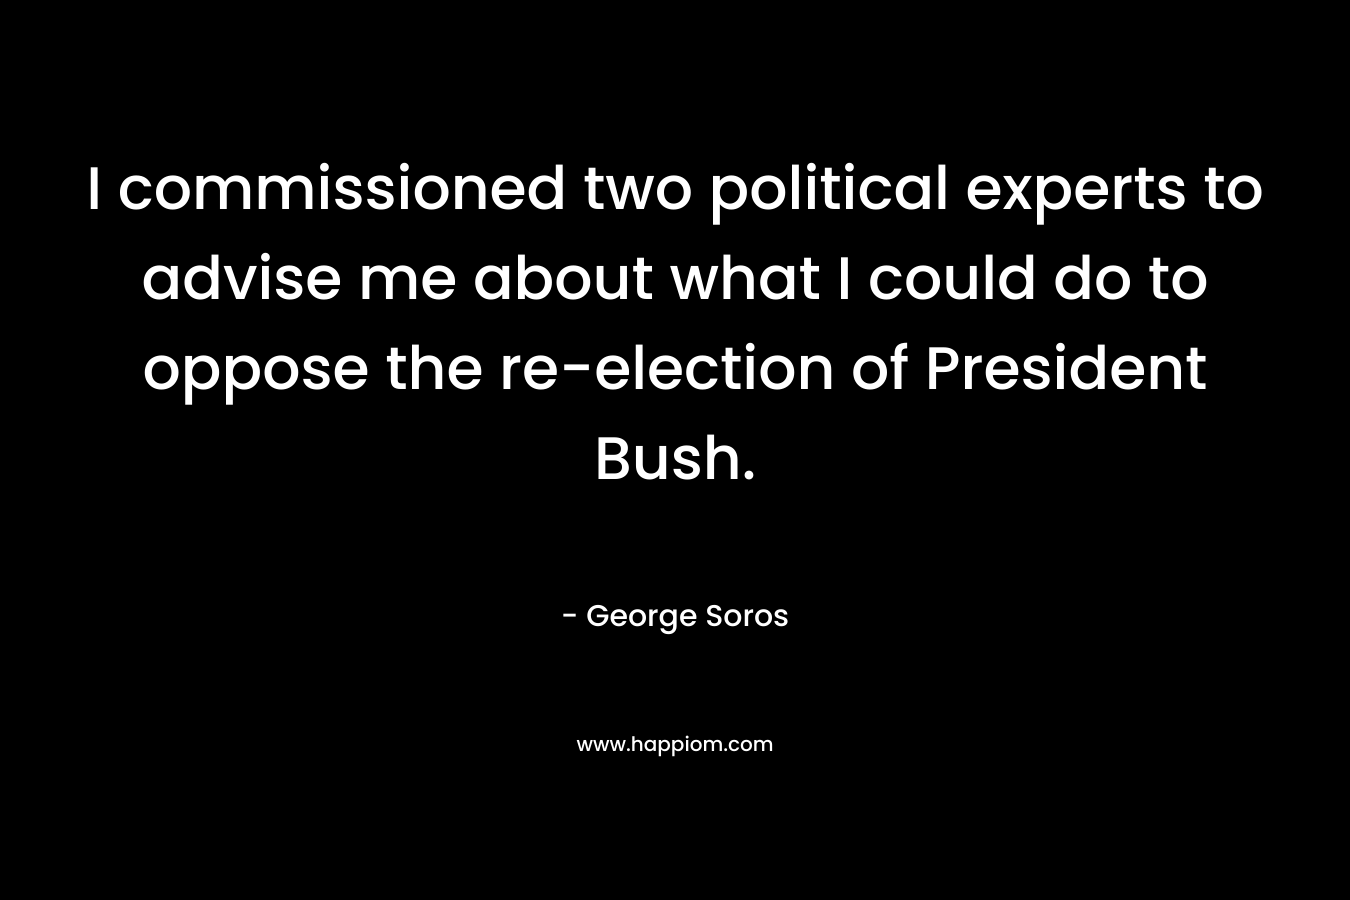 I commissioned two political experts to advise me about what I could do to oppose the re-election of President Bush. – George Soros